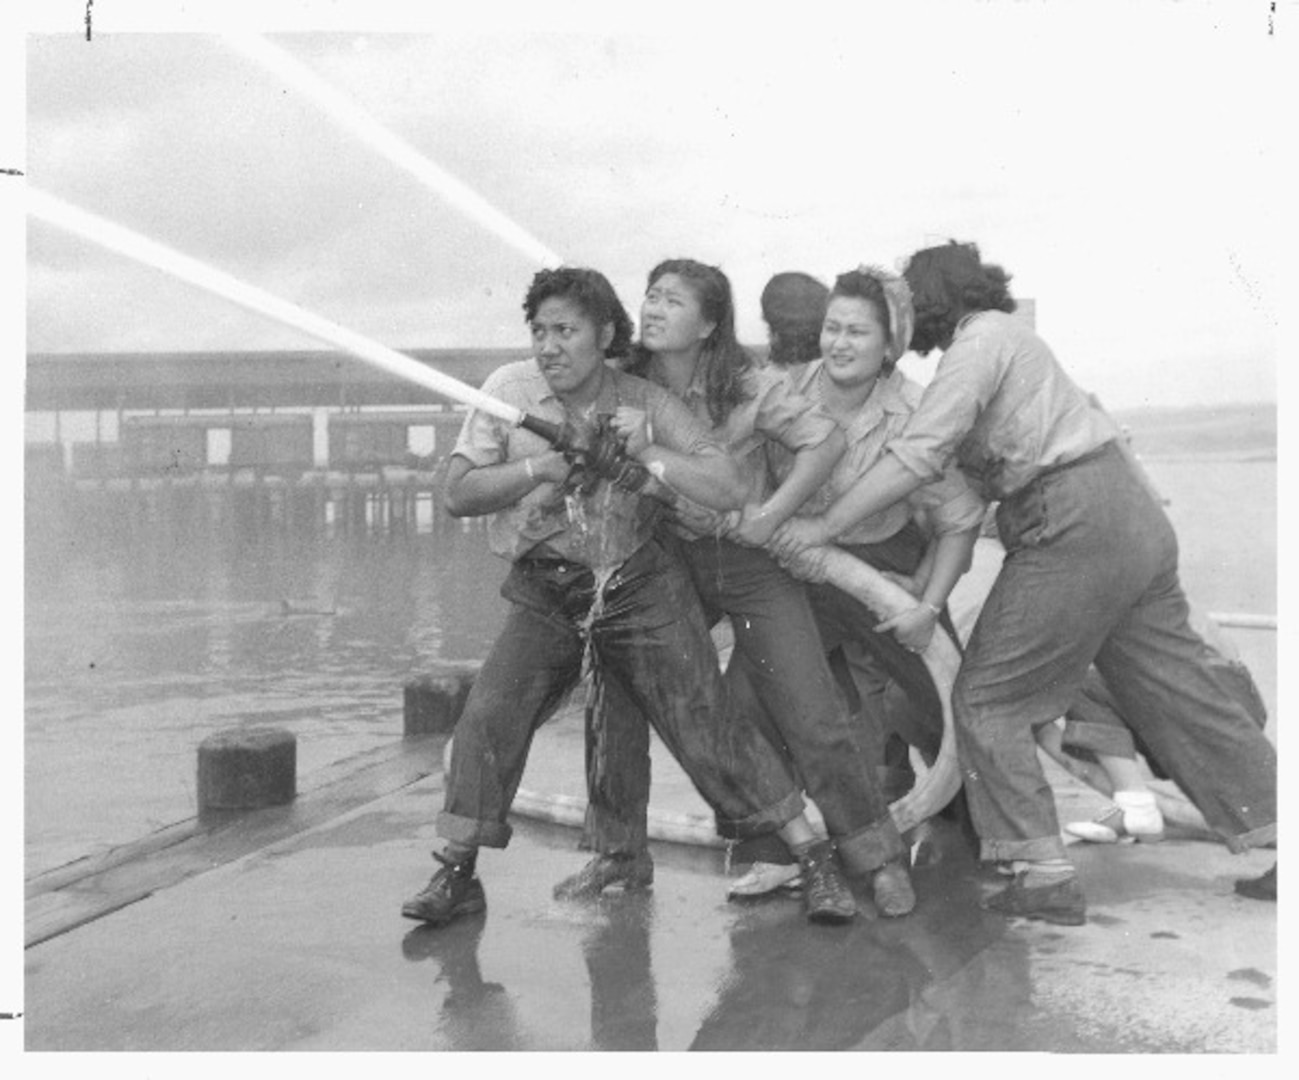 Former Navy Yard Firefighter and Pearl Harbor Naval Shipyard Warehouse Supply Manager Katherine Lowe, one of the four women in the now famous WWII firefighting photo.